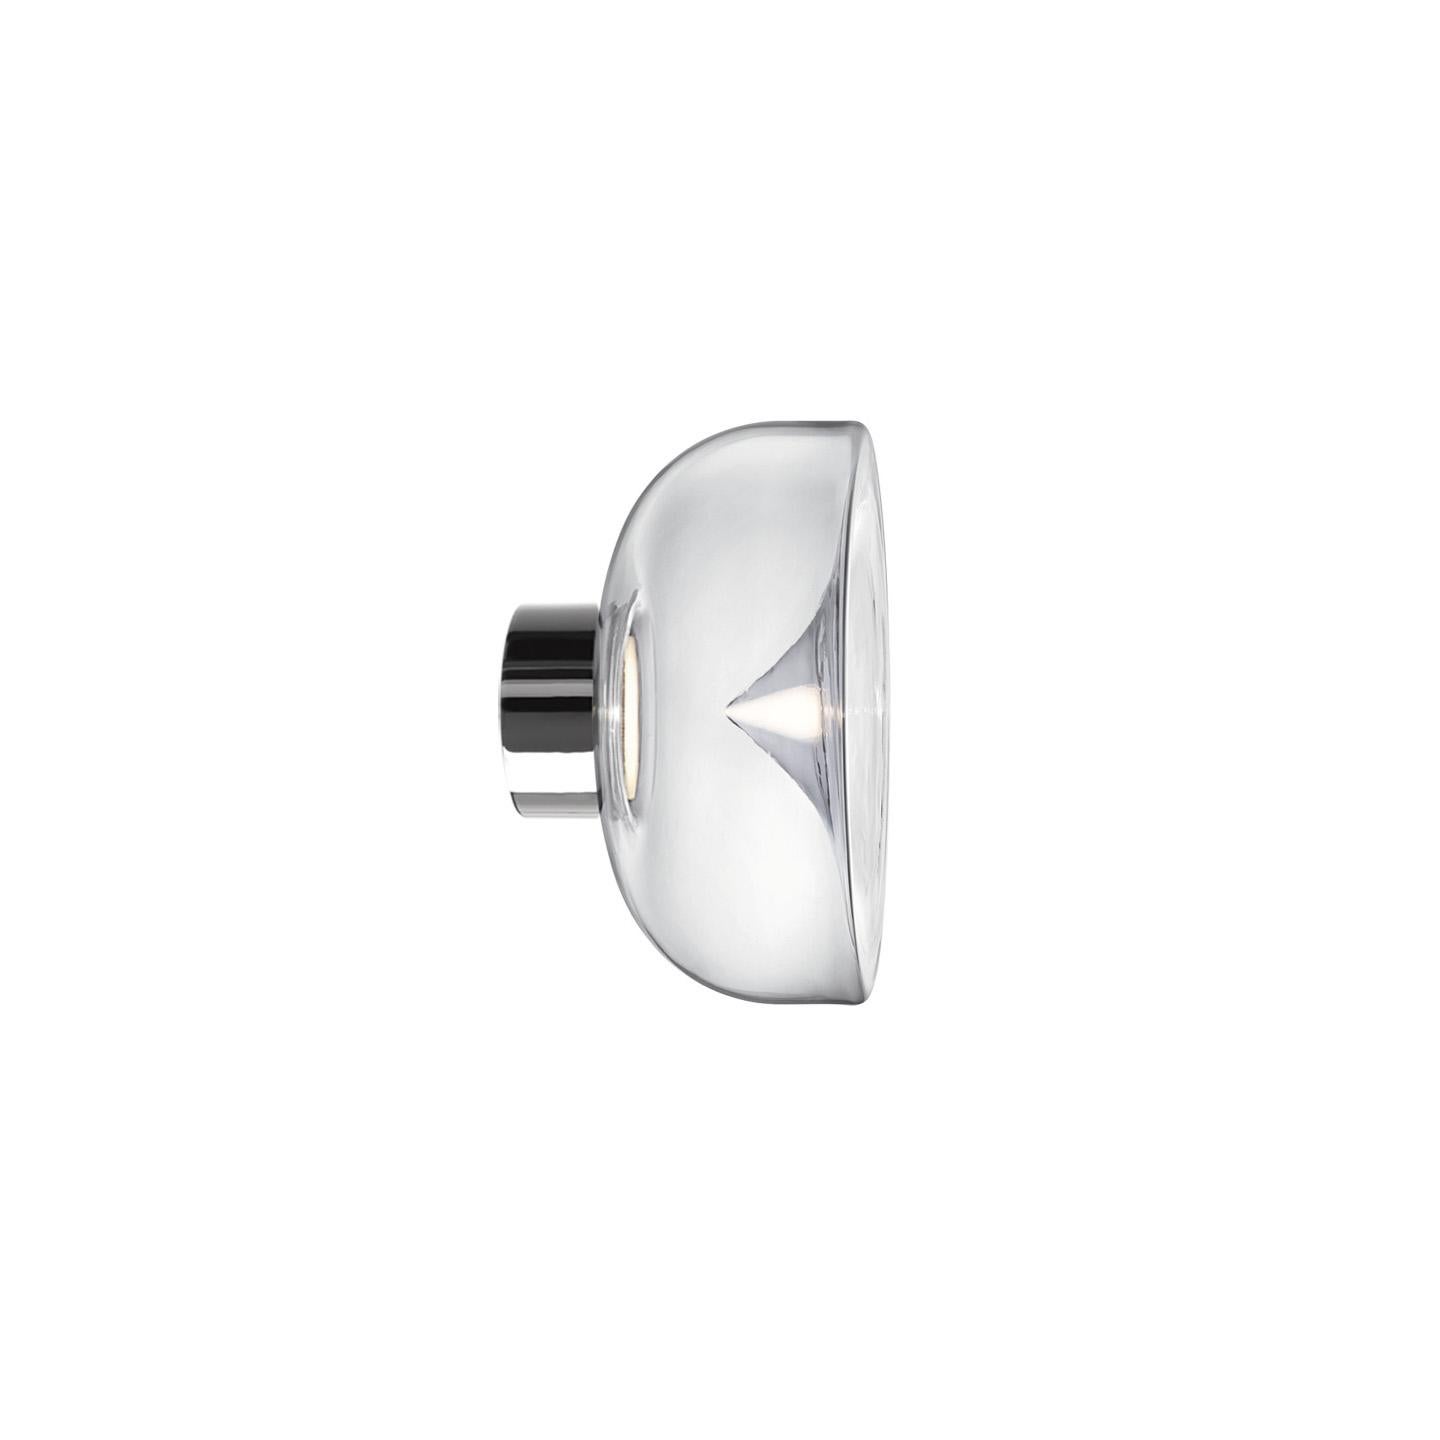 Modern Leucos Aella Mini P-PL 25 LED Flush Mount in Clear and Chrome by Toso & Massari For Sale